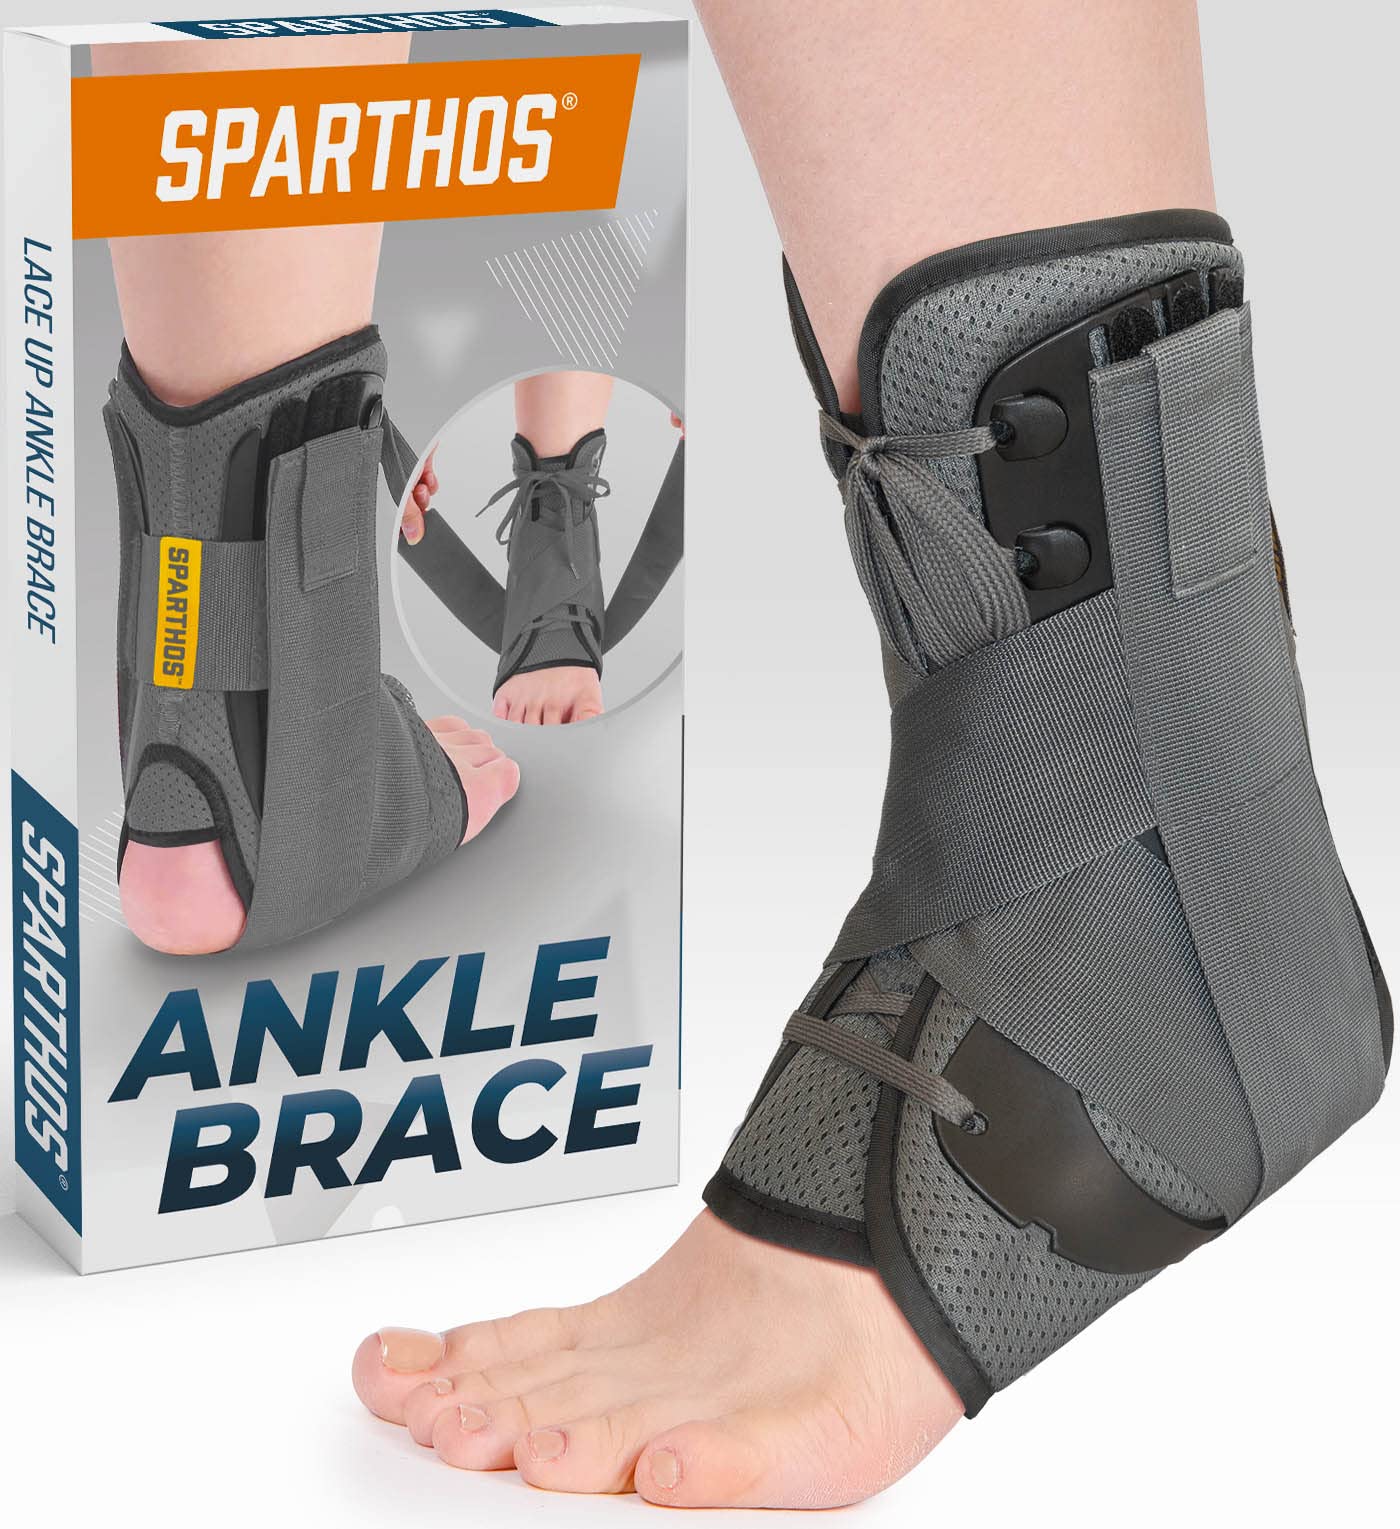 Sparthos Lace Up Ankle Brace - Support for Injury Recovery and Sprained  Foot - Compression for Running Basketball Volleyball - Interchangeable  Stabilizer Braces - For Men & Women (Gray - Medium) Medium (Pack of 1)  Grap